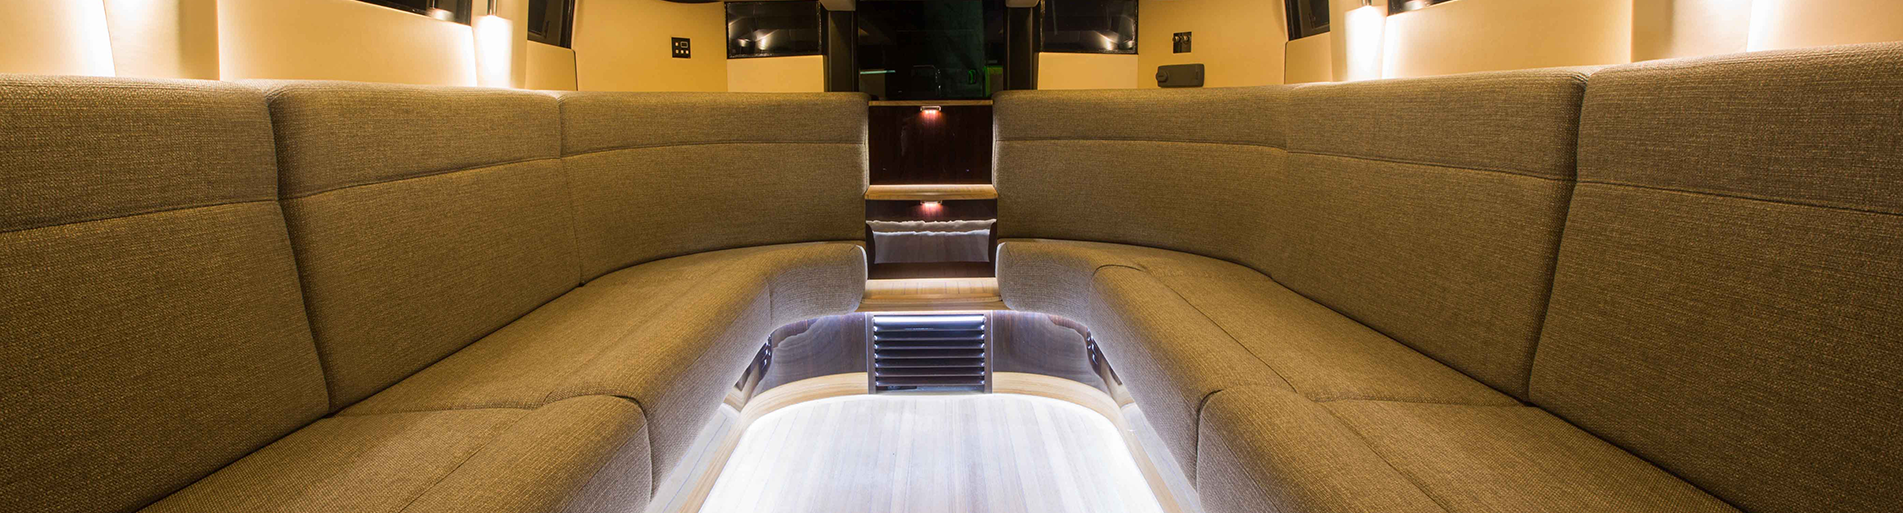 Luxury Limousine Interior Made by Lang & Potter